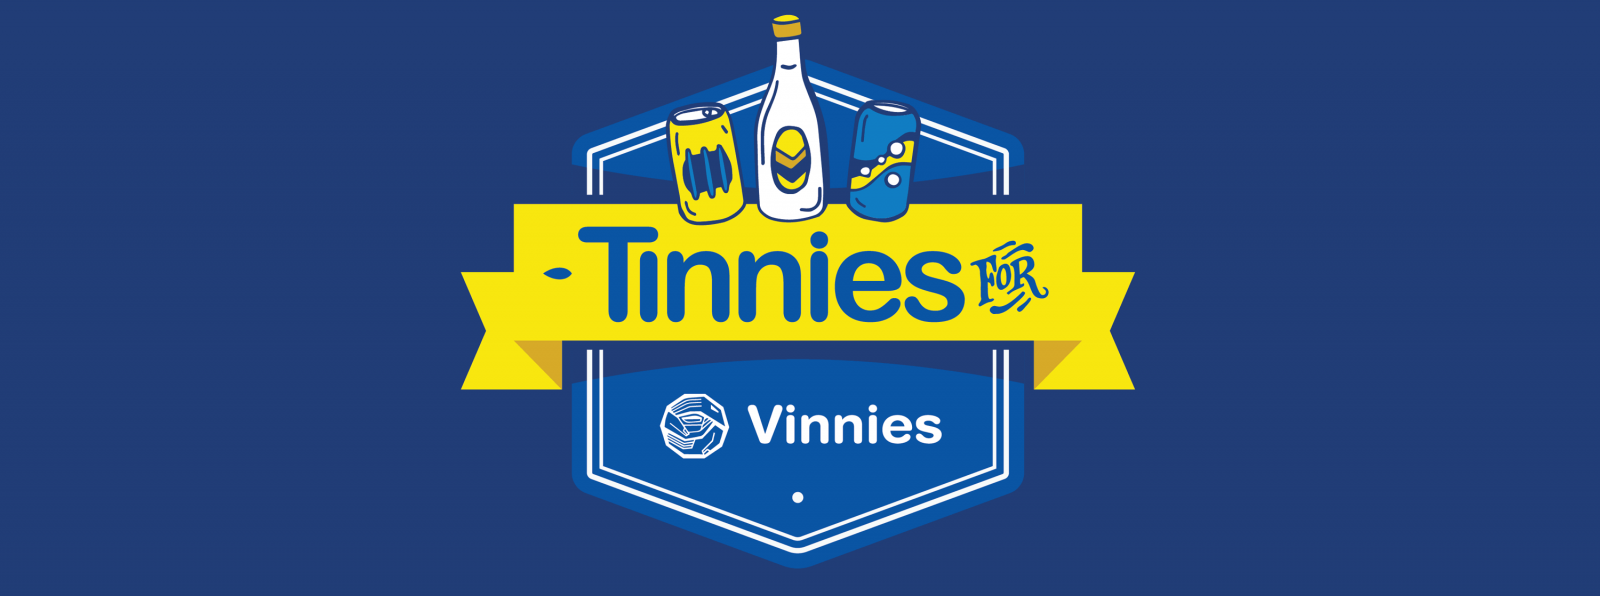 Tinnies for Vinnies PNG 3000X3000